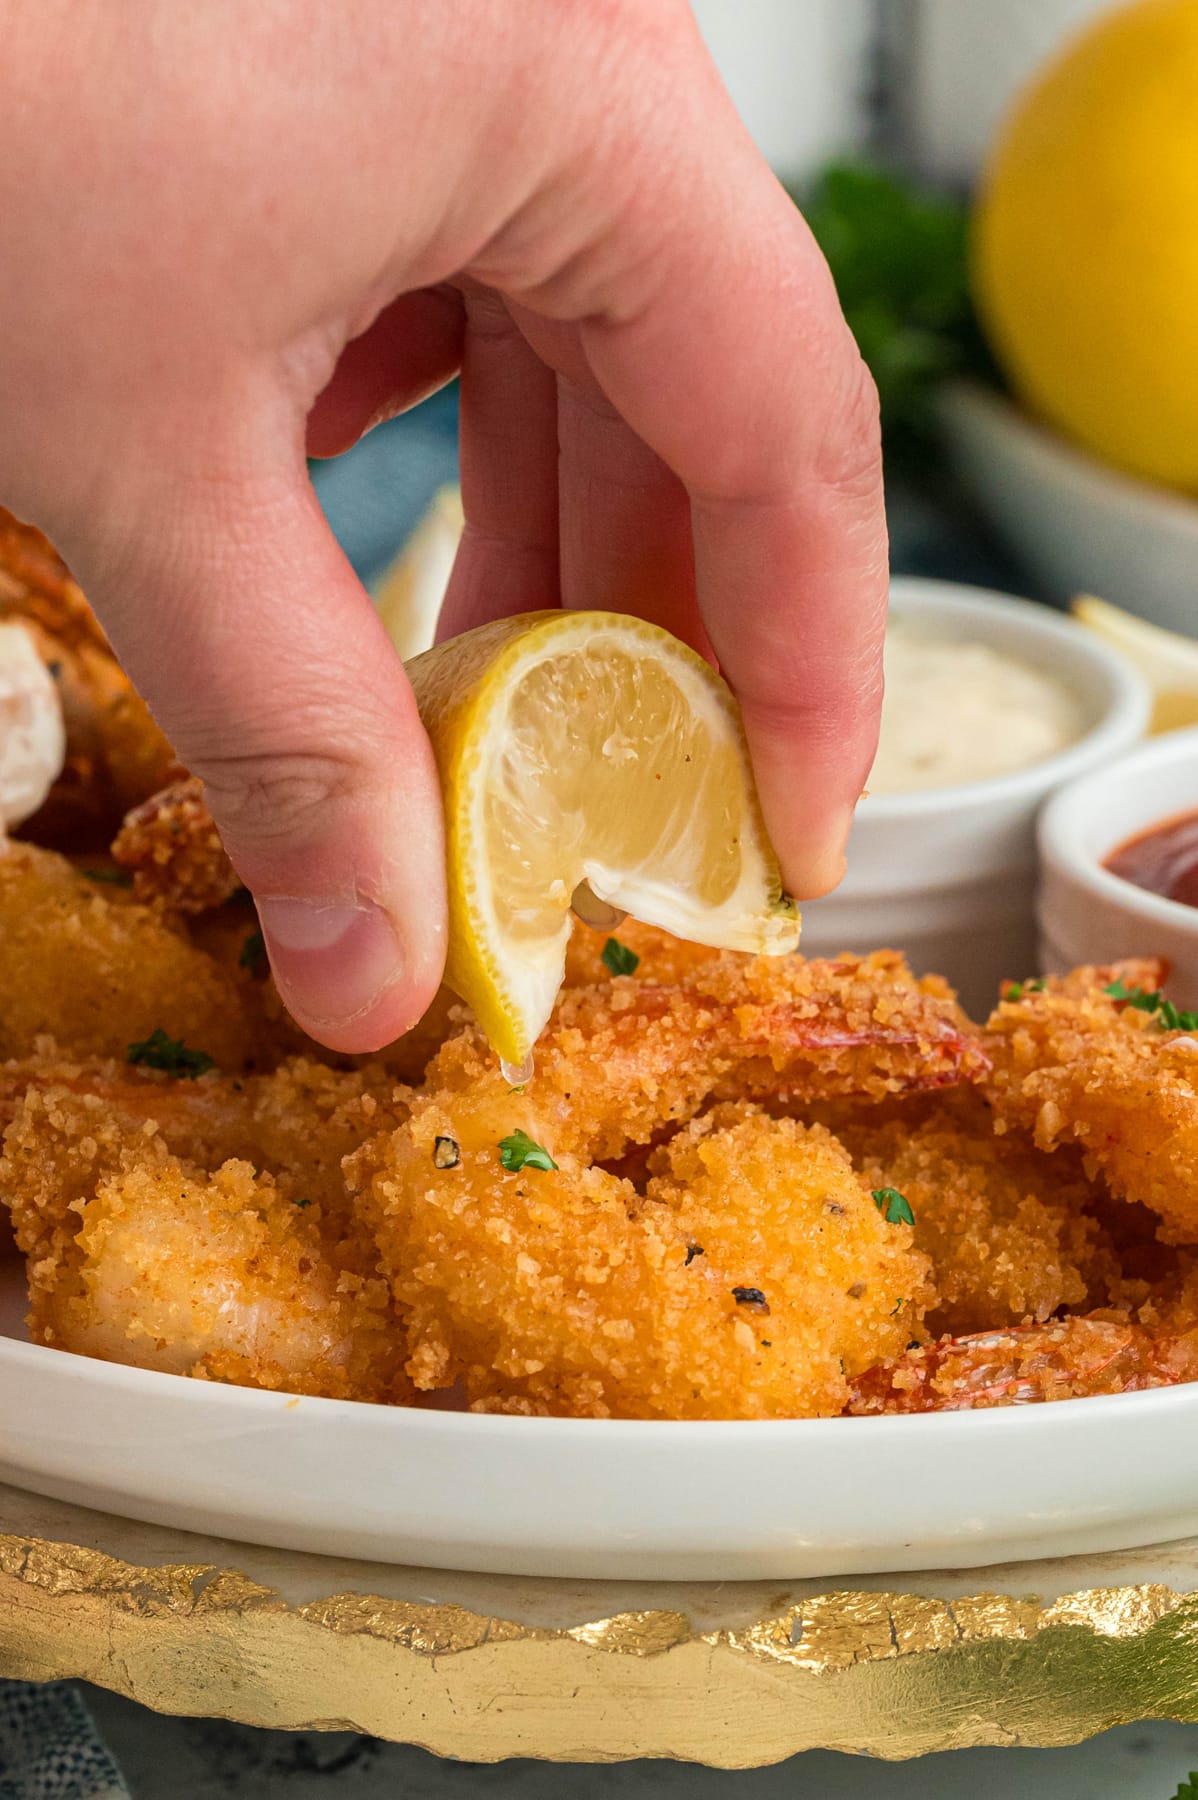 A hand squeezing a lime wedge over fried shrimp